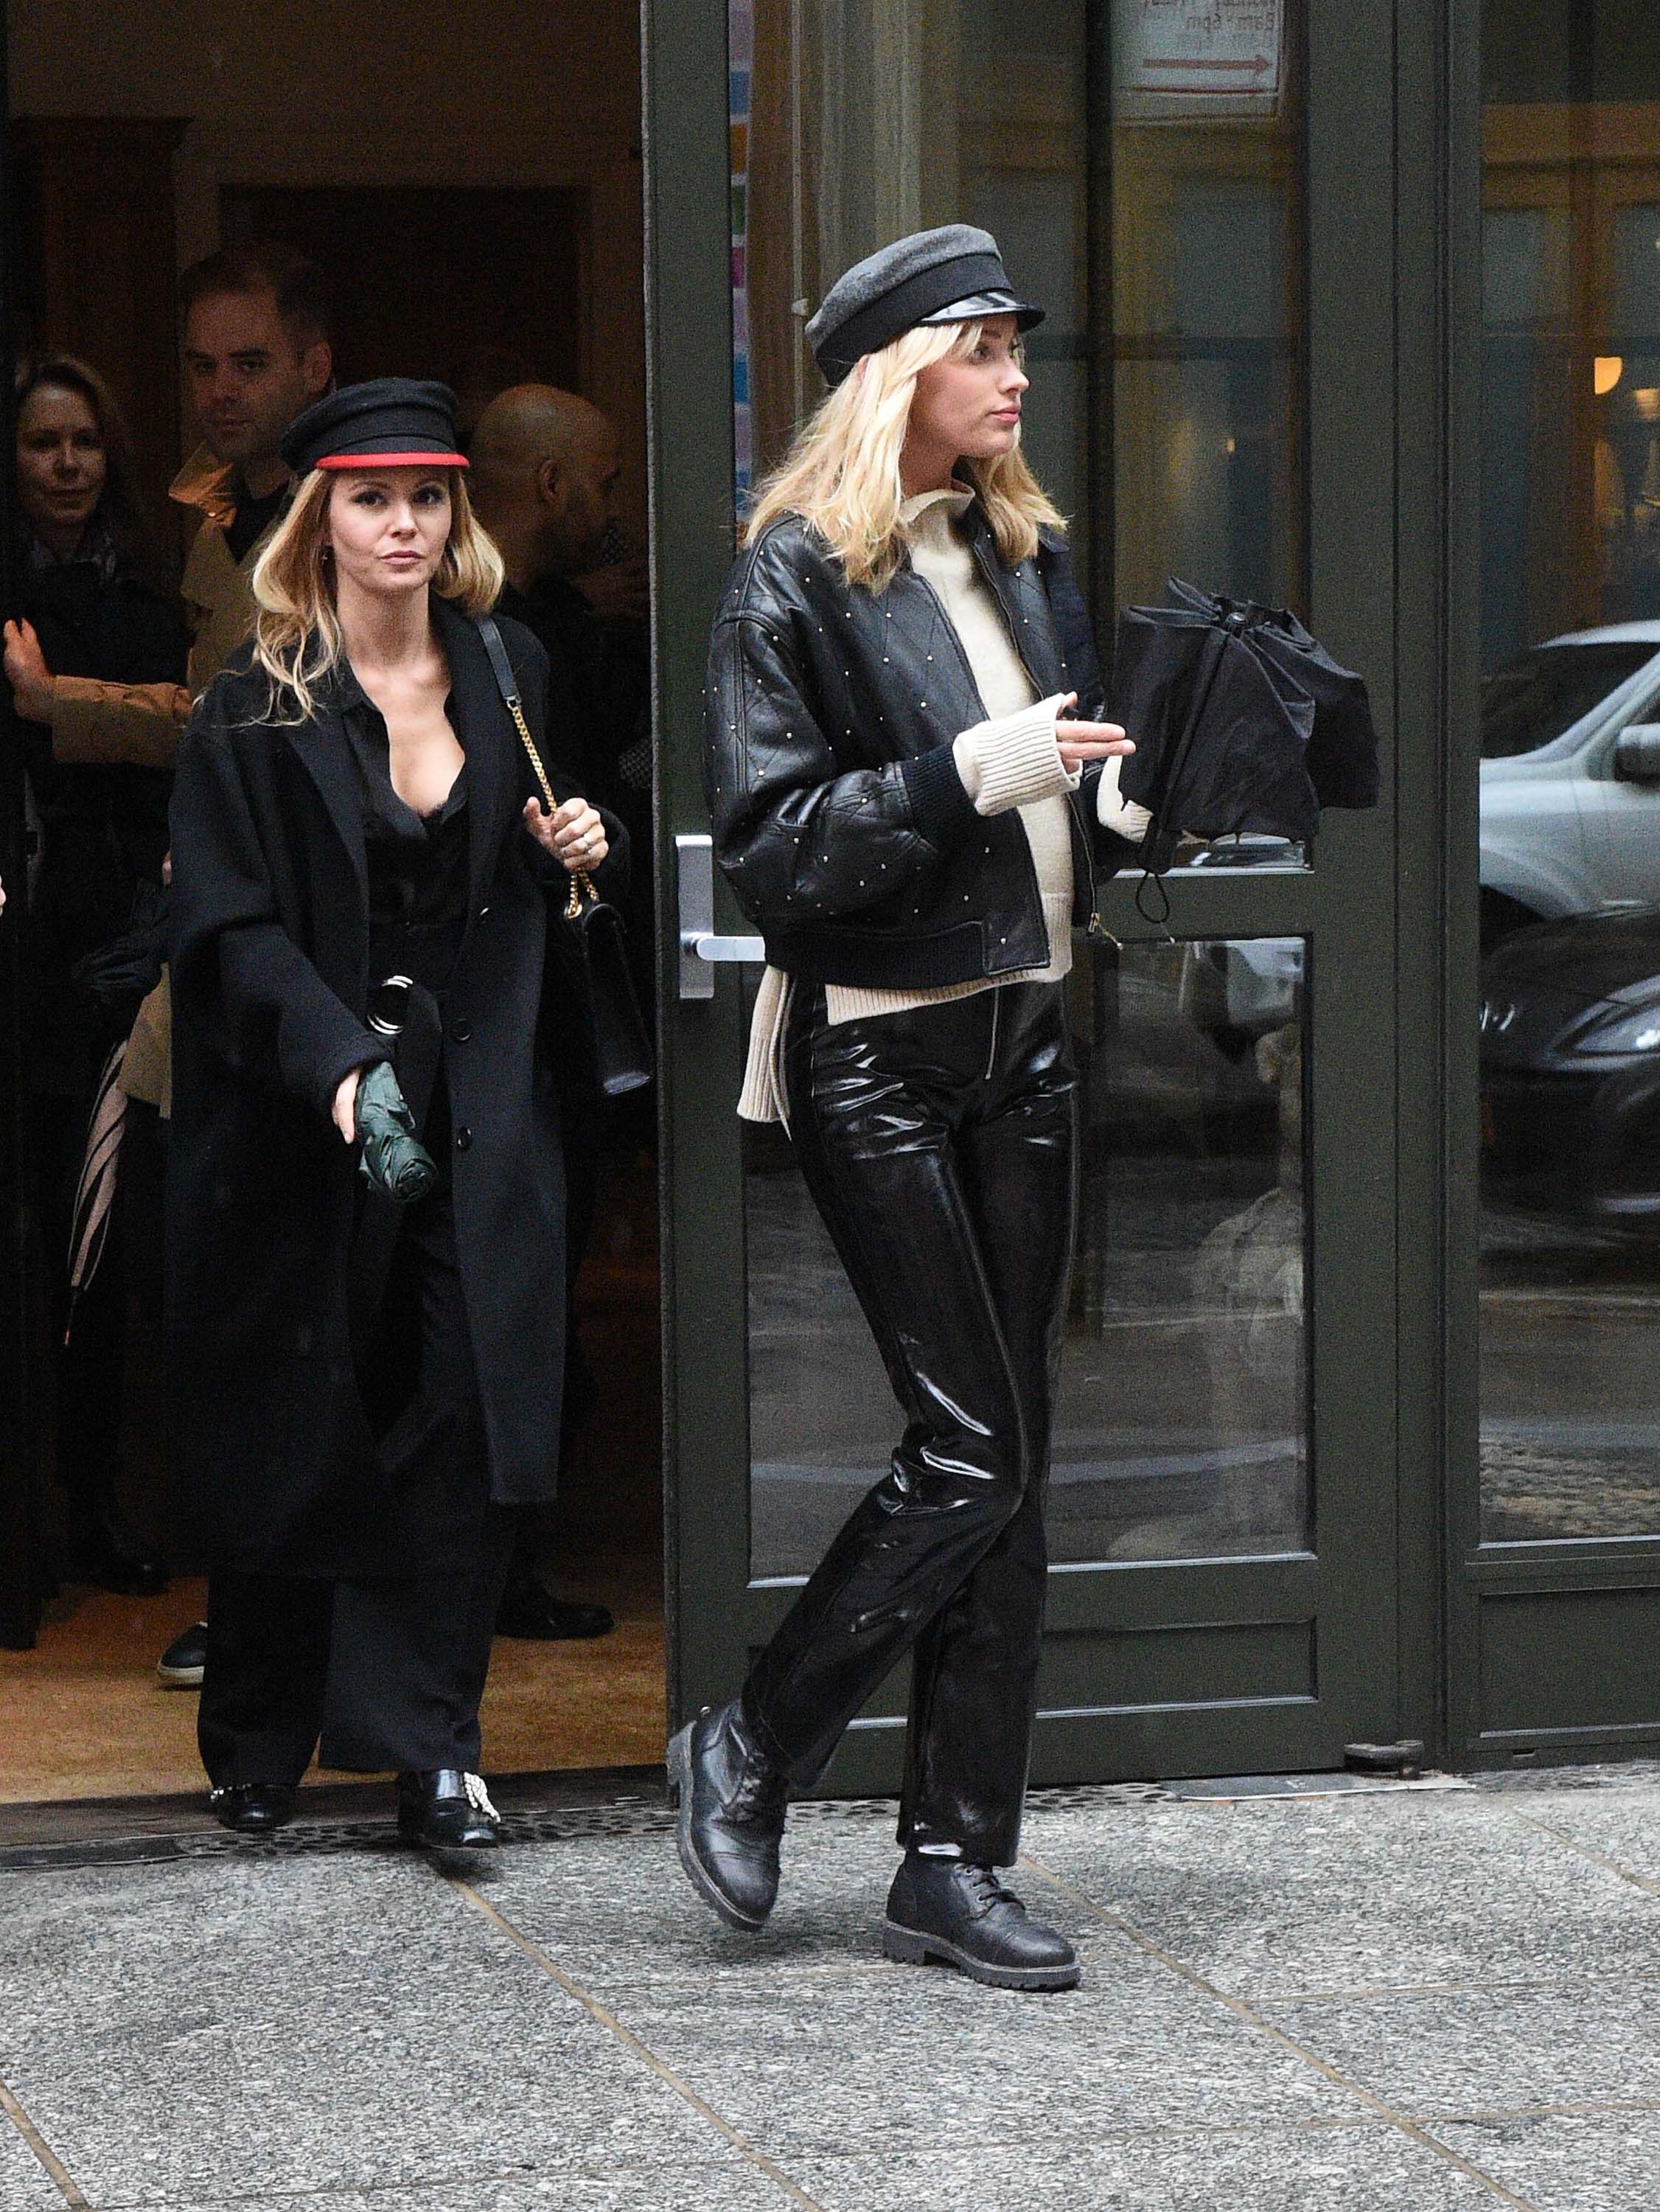 Elsa Hosk out and about with a friend in NYC